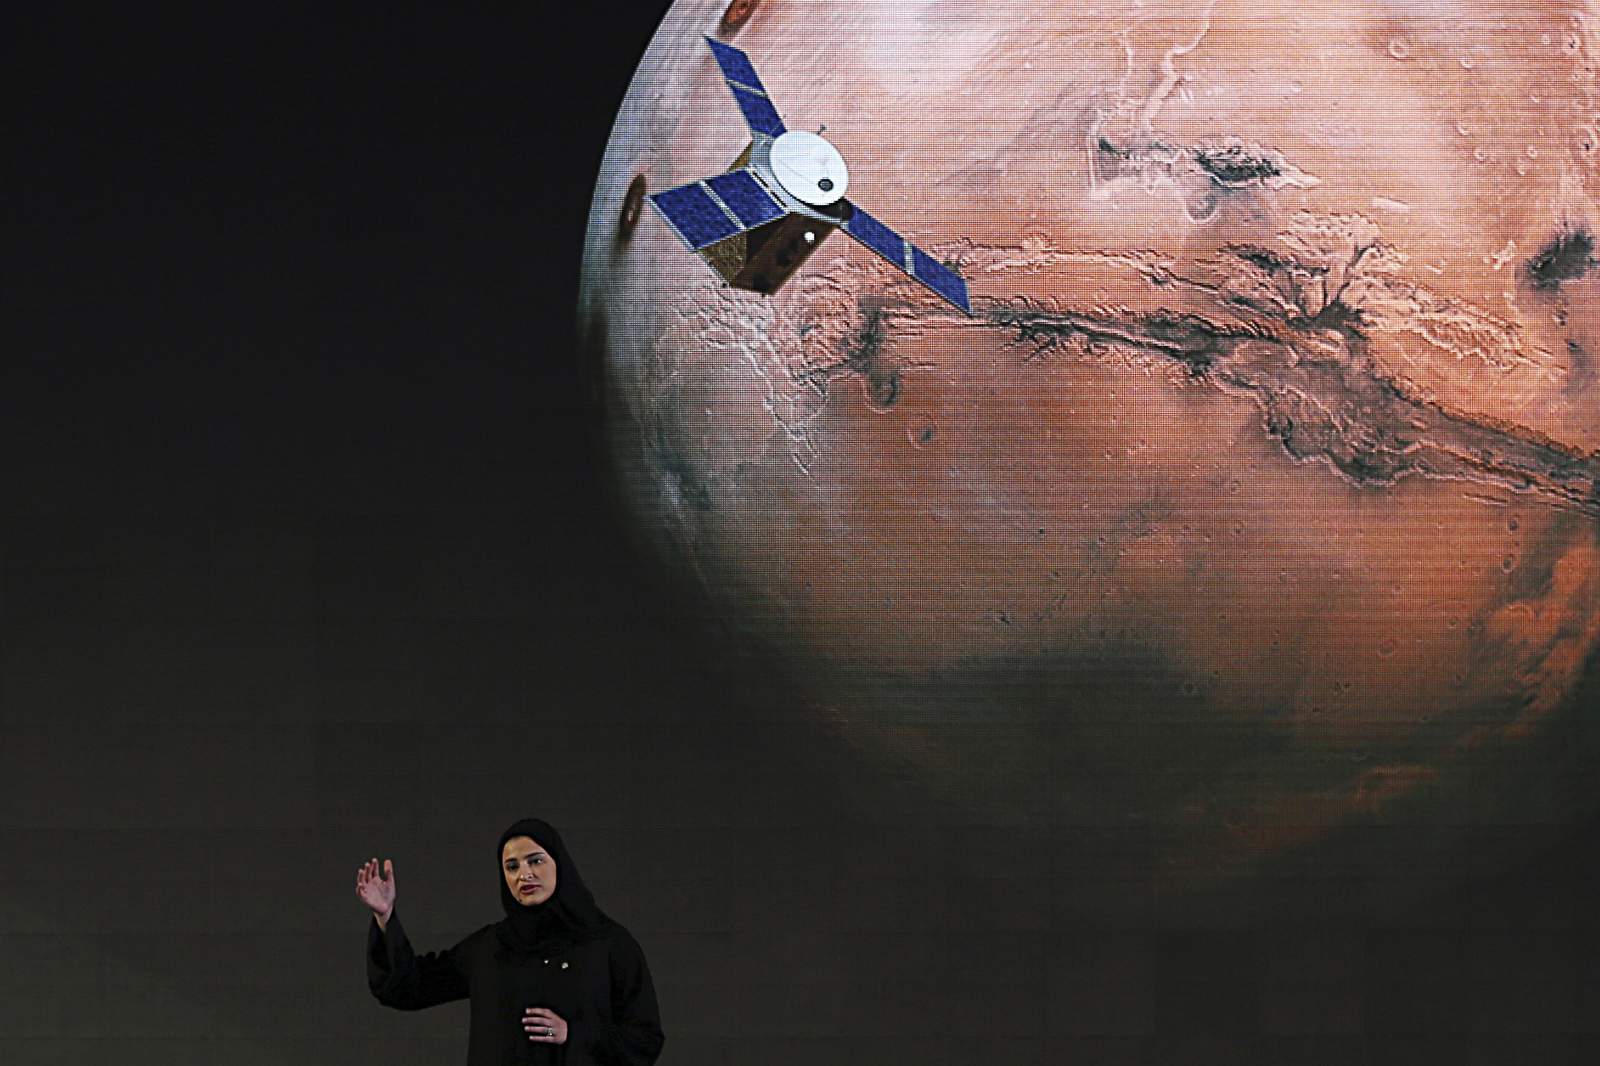 UAE successfully puts spacecraft in Mars orbit on first try